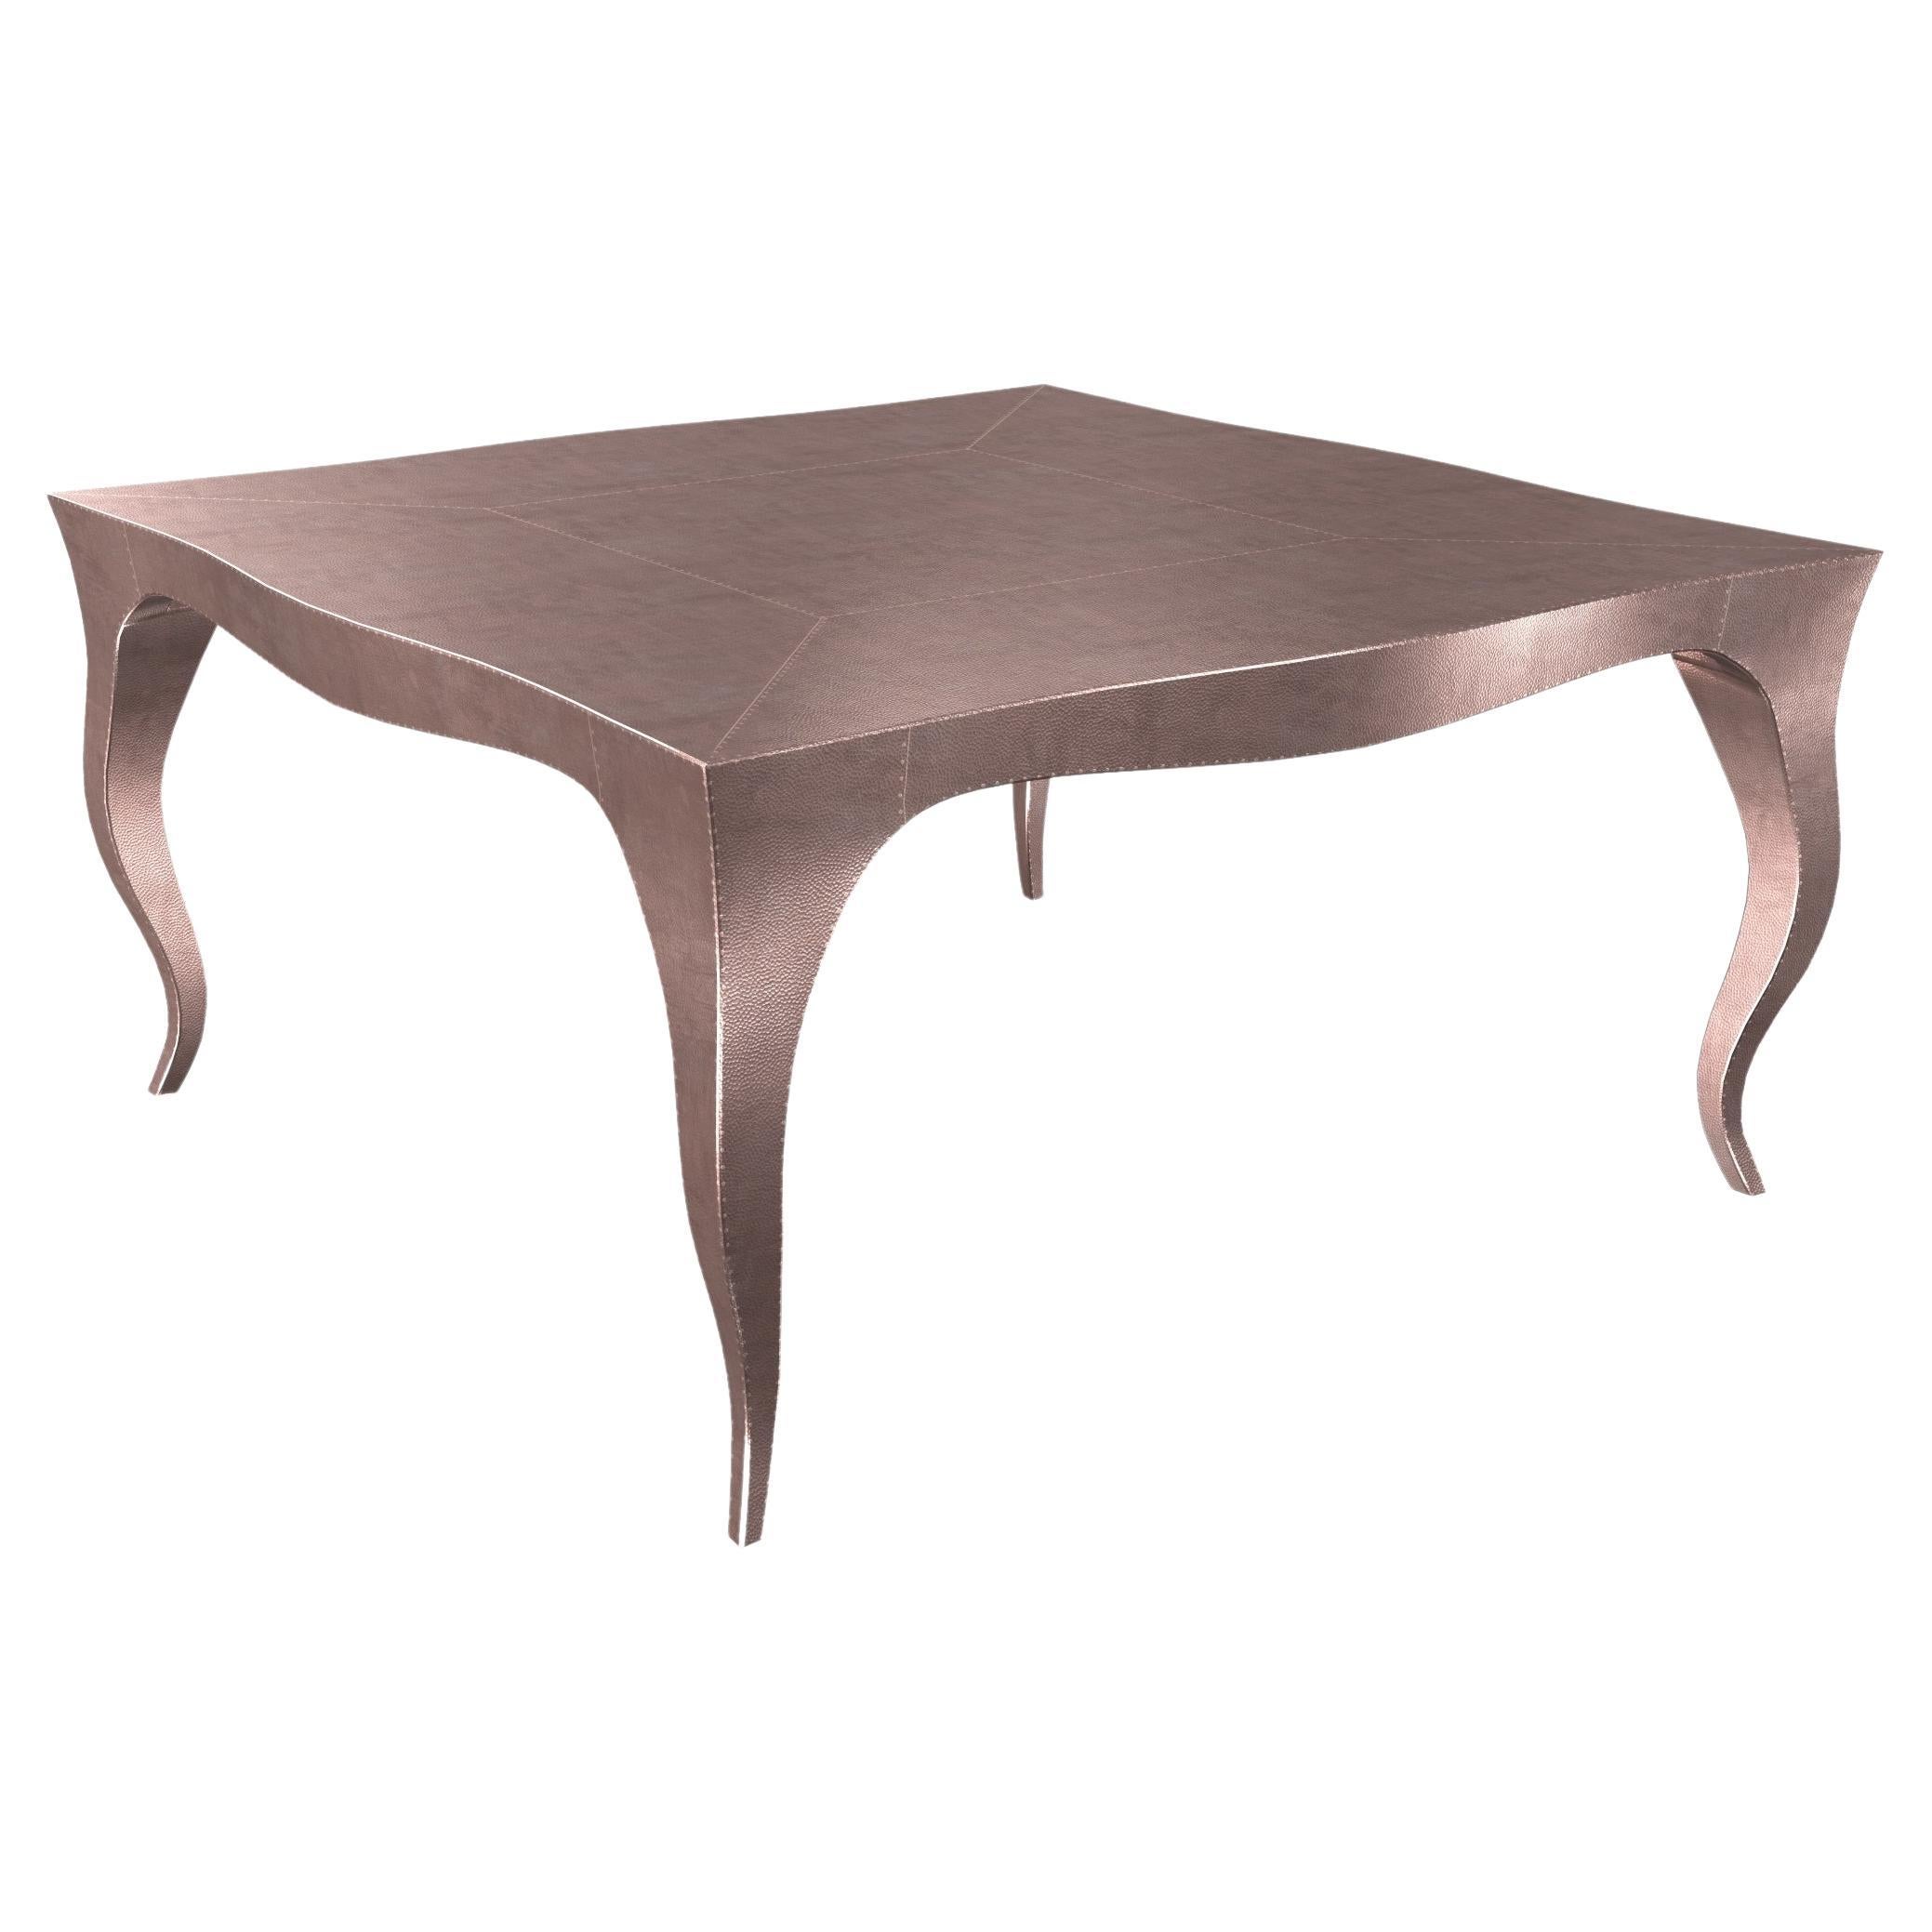 Louise Art Deco Card Tables and Tea Tables Mid. Hammered Copper by Paul Mathieu